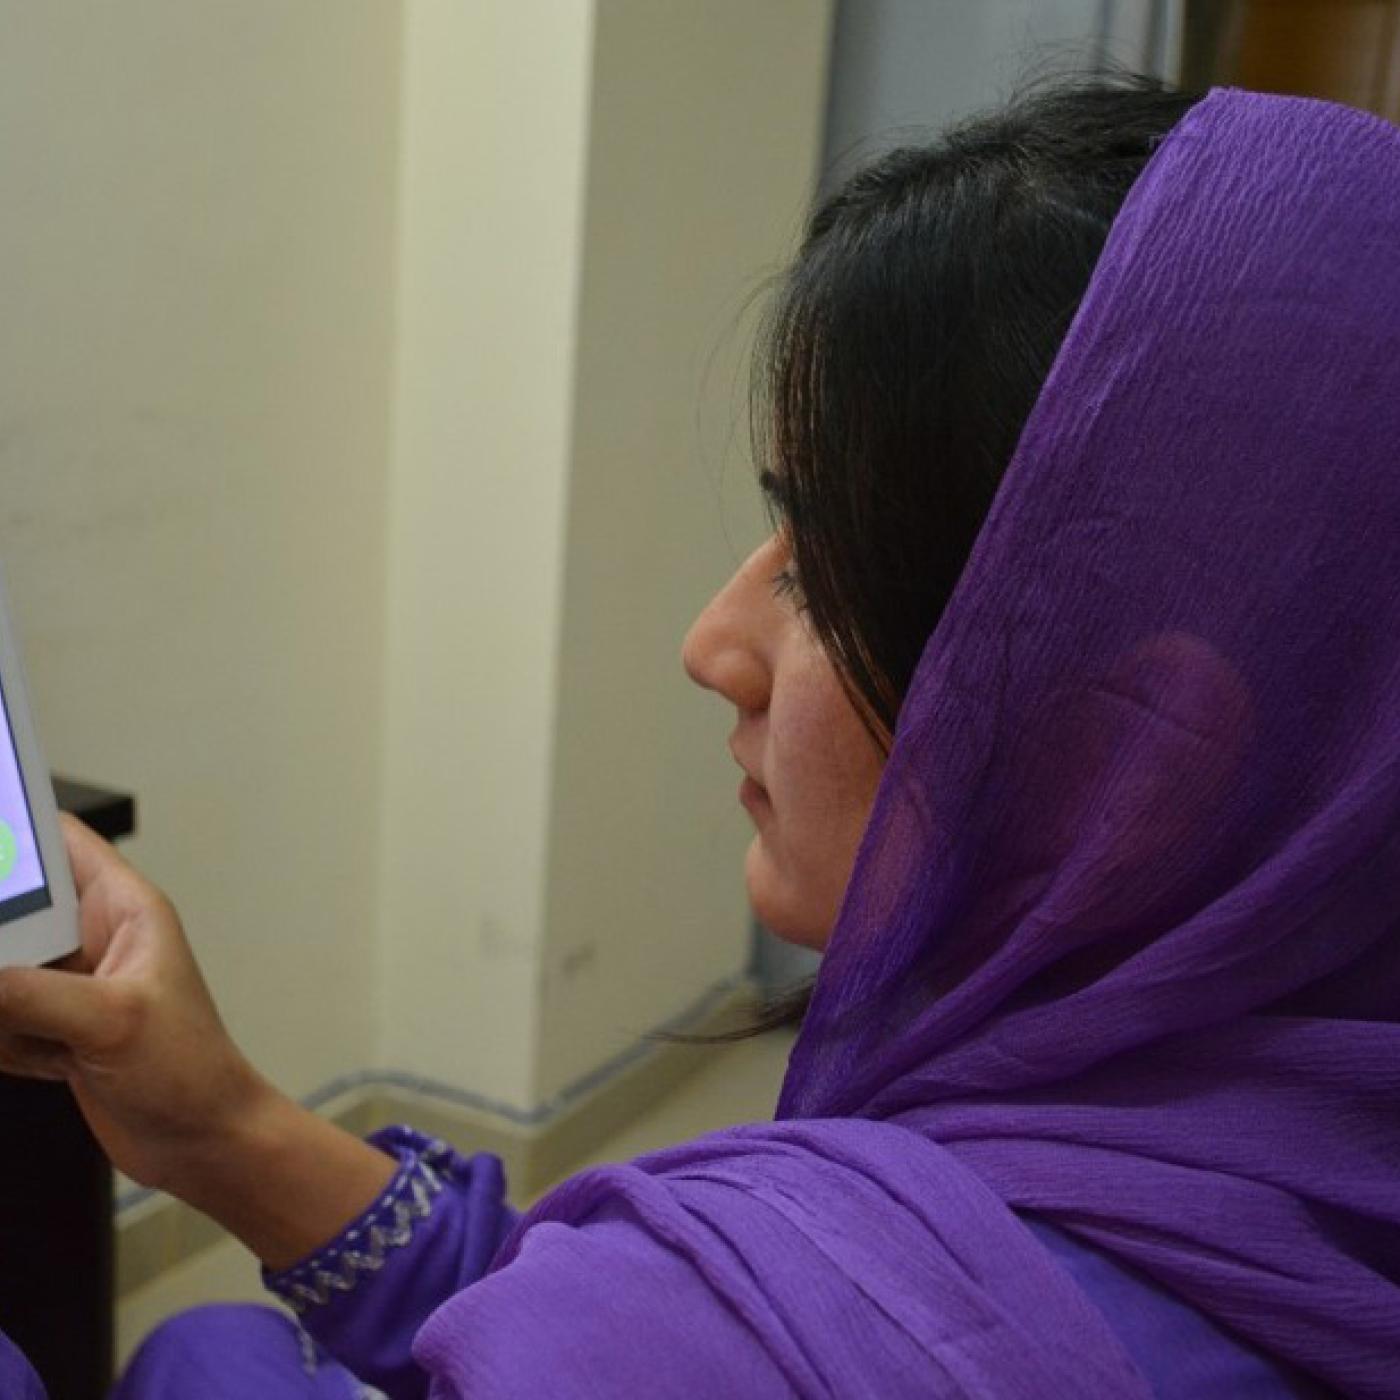 In Pakistan, the Special Talent Exchange Program (STEP), a disability rights organization, developed an Android mobile app to connect persons with disabilities with information on disability rights.